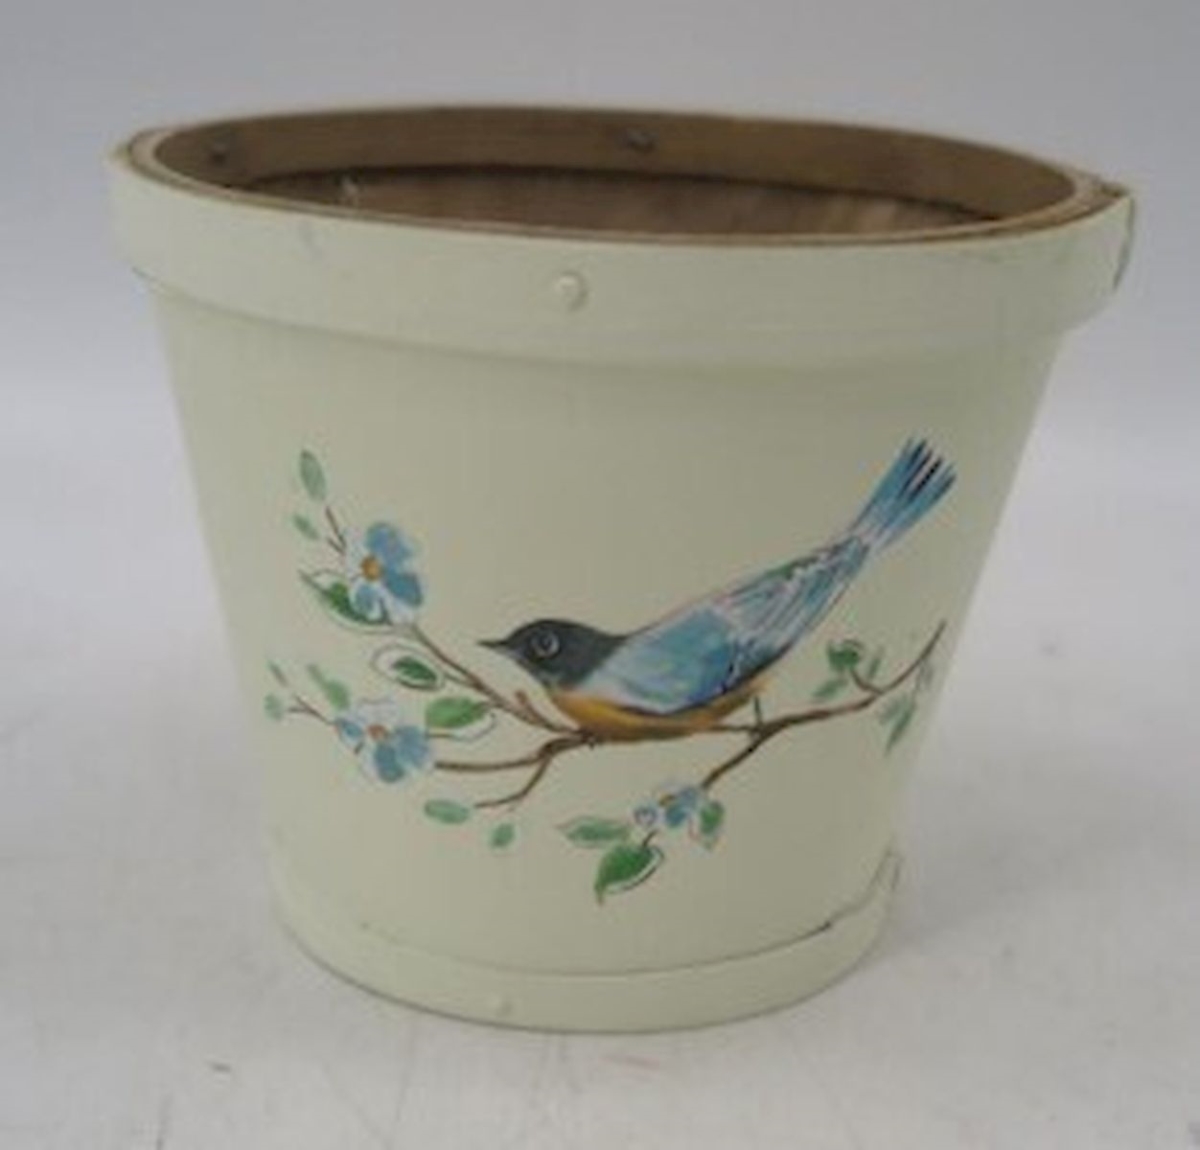 Picture of 212 Main AI-3500-416 Cream with Blue Bird Planter